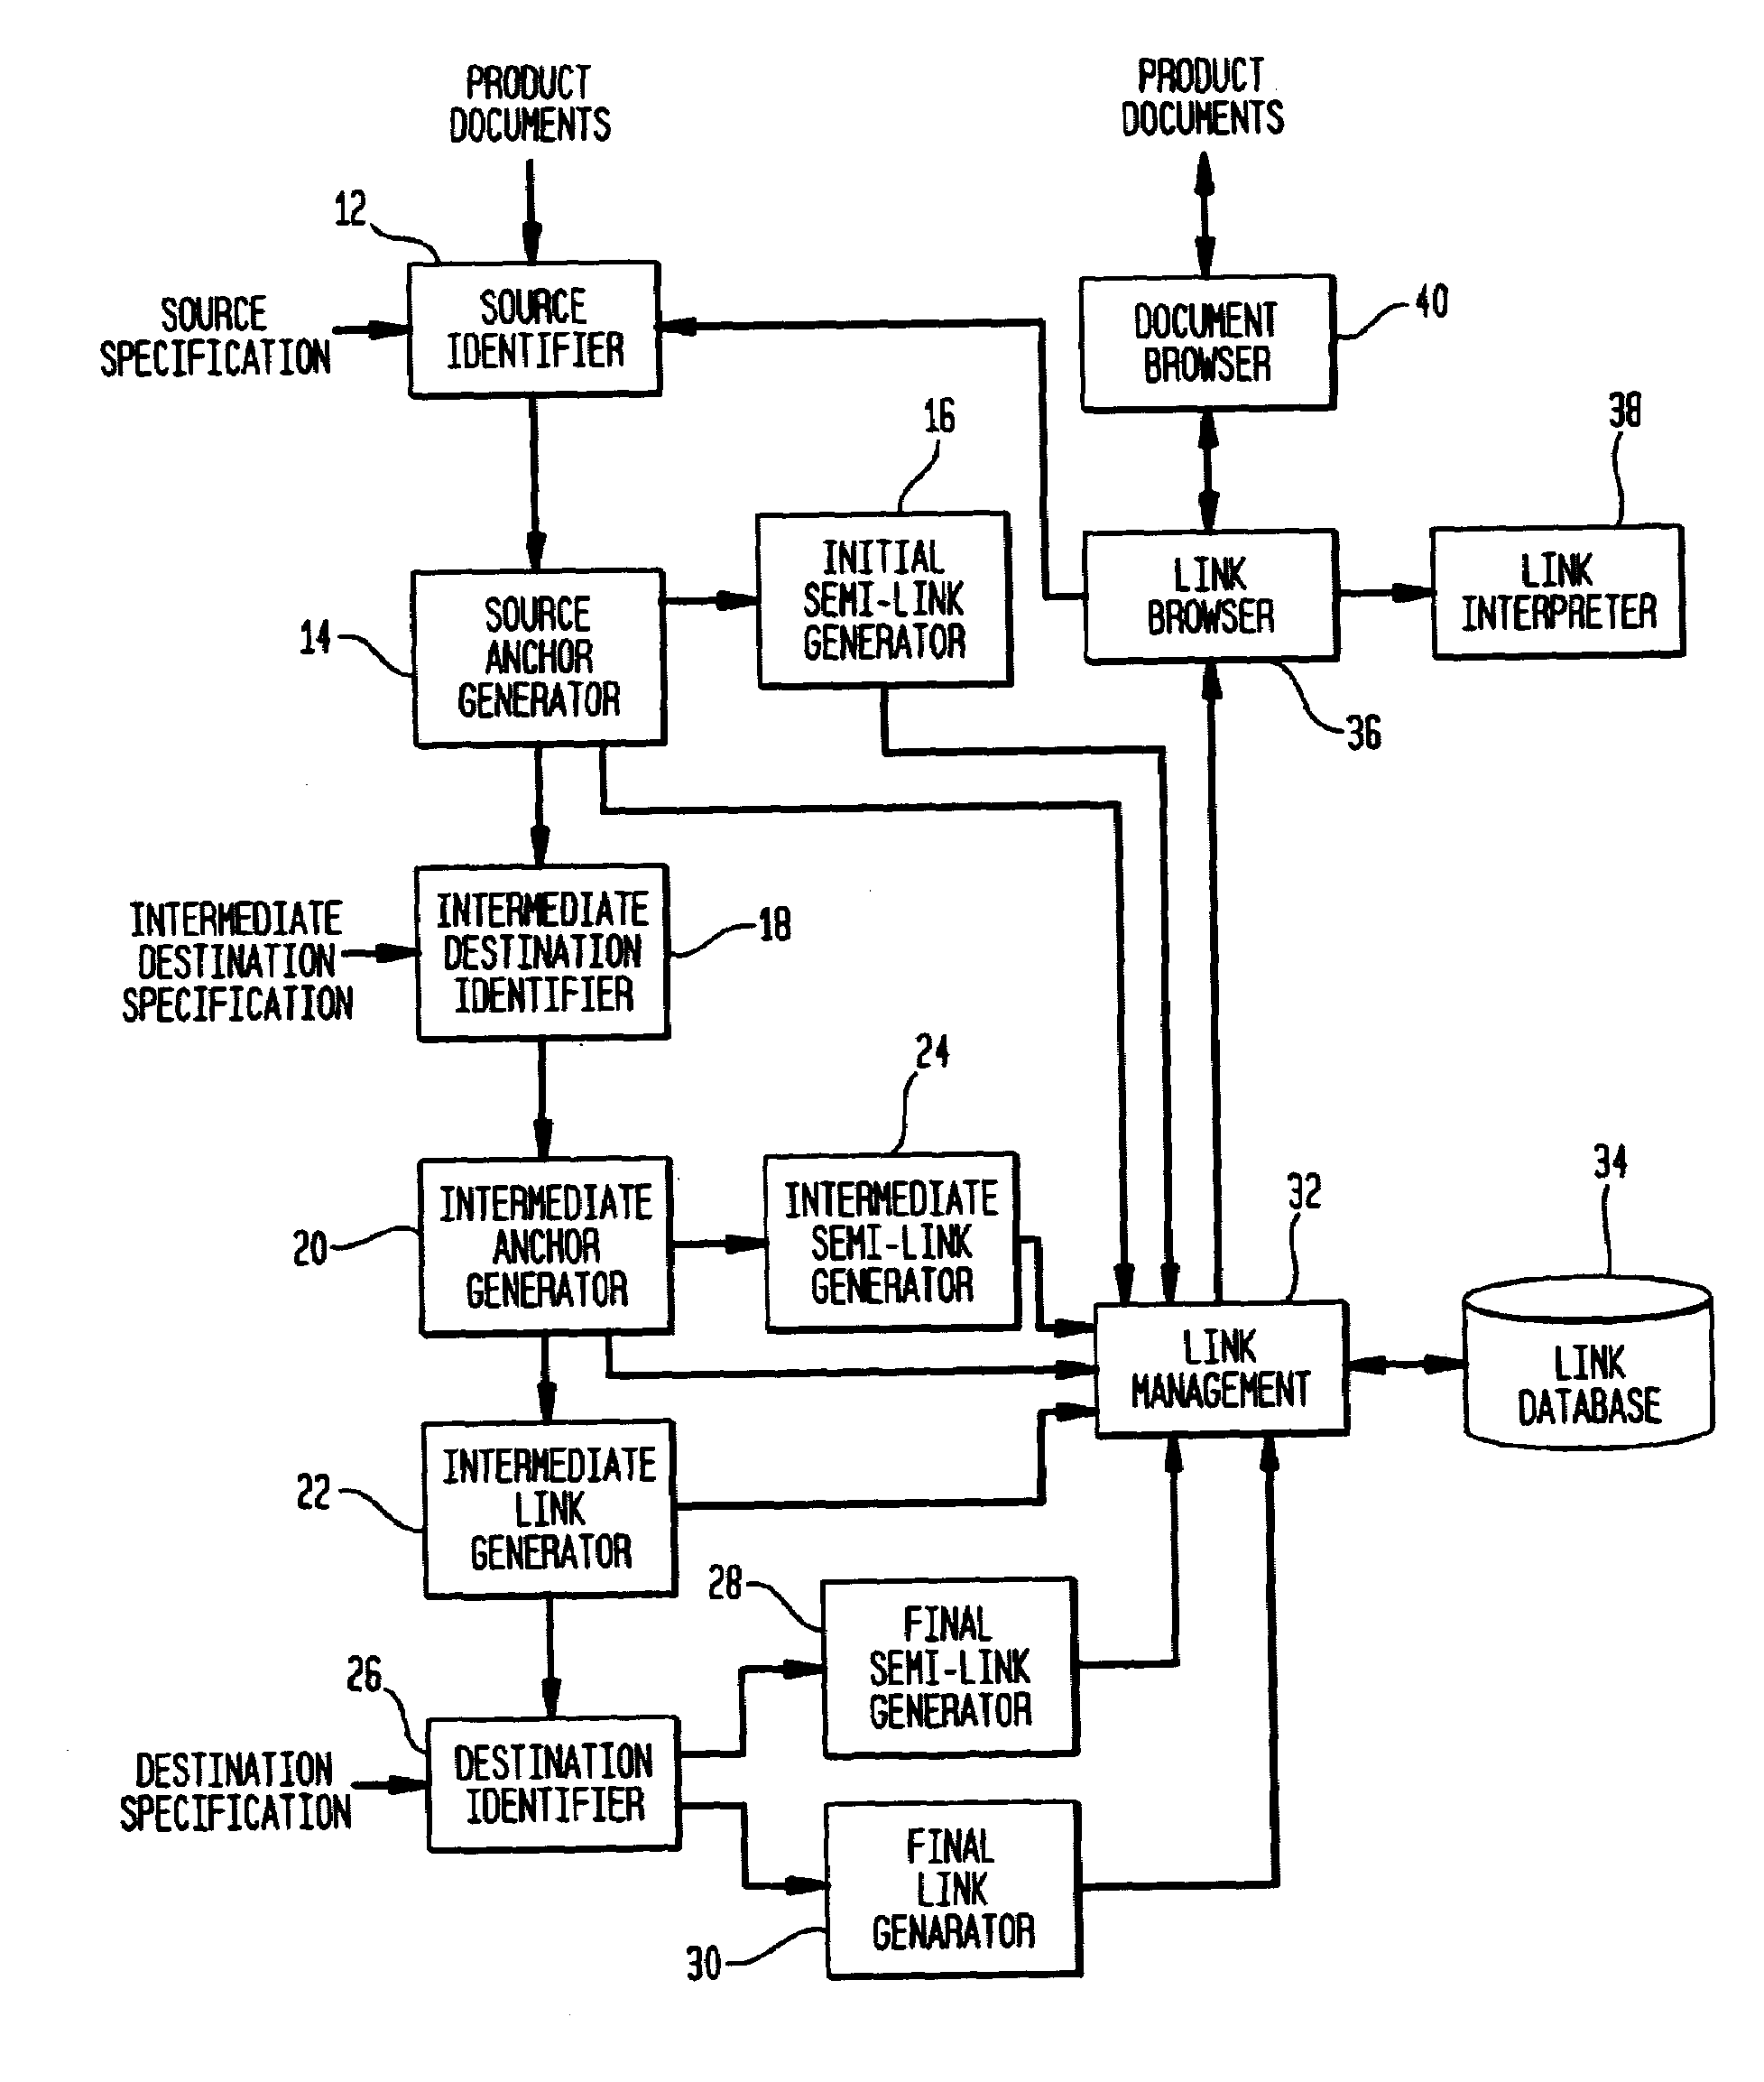 Generalized system for automatically hyperlinking multimedia product documents